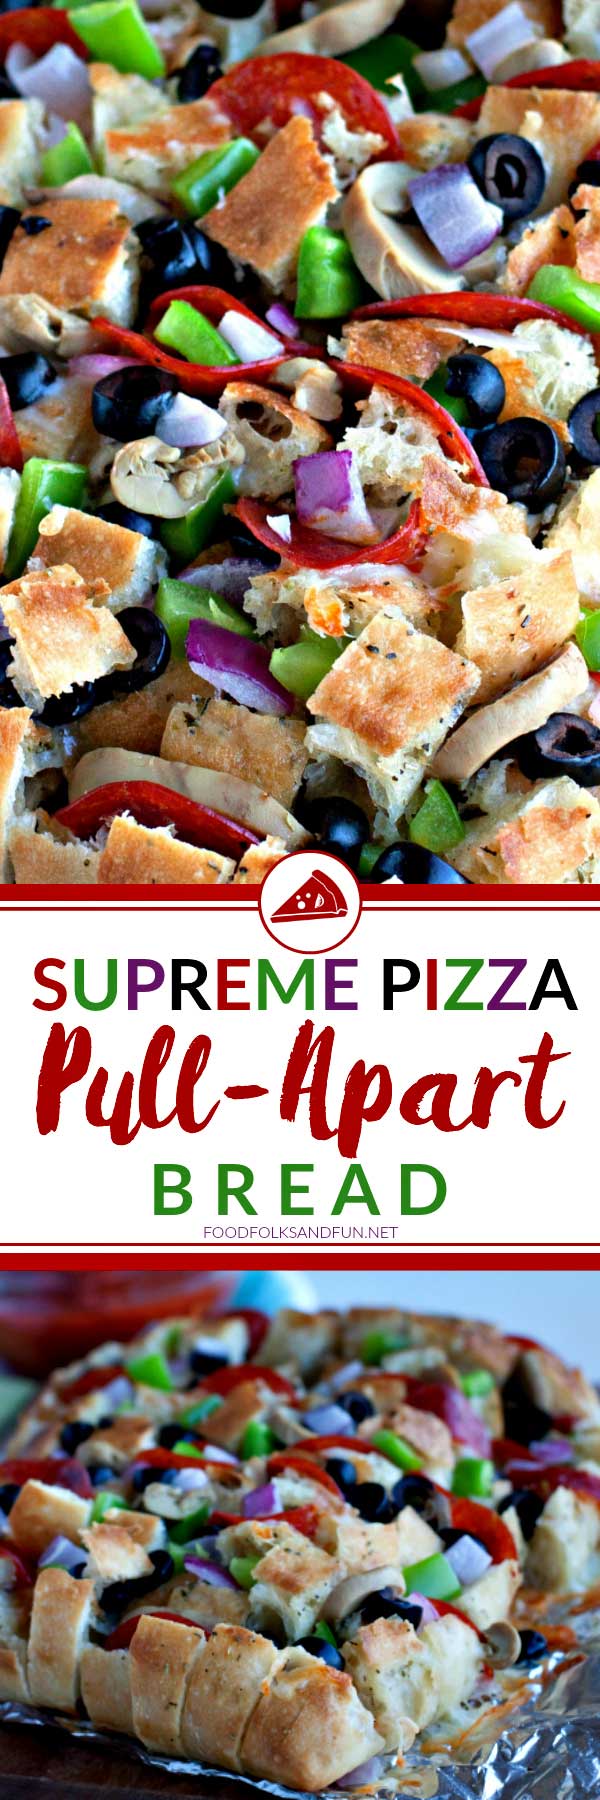 A collage of Supreme Pizza Pull-apart Bread with text overlay for Pinterest